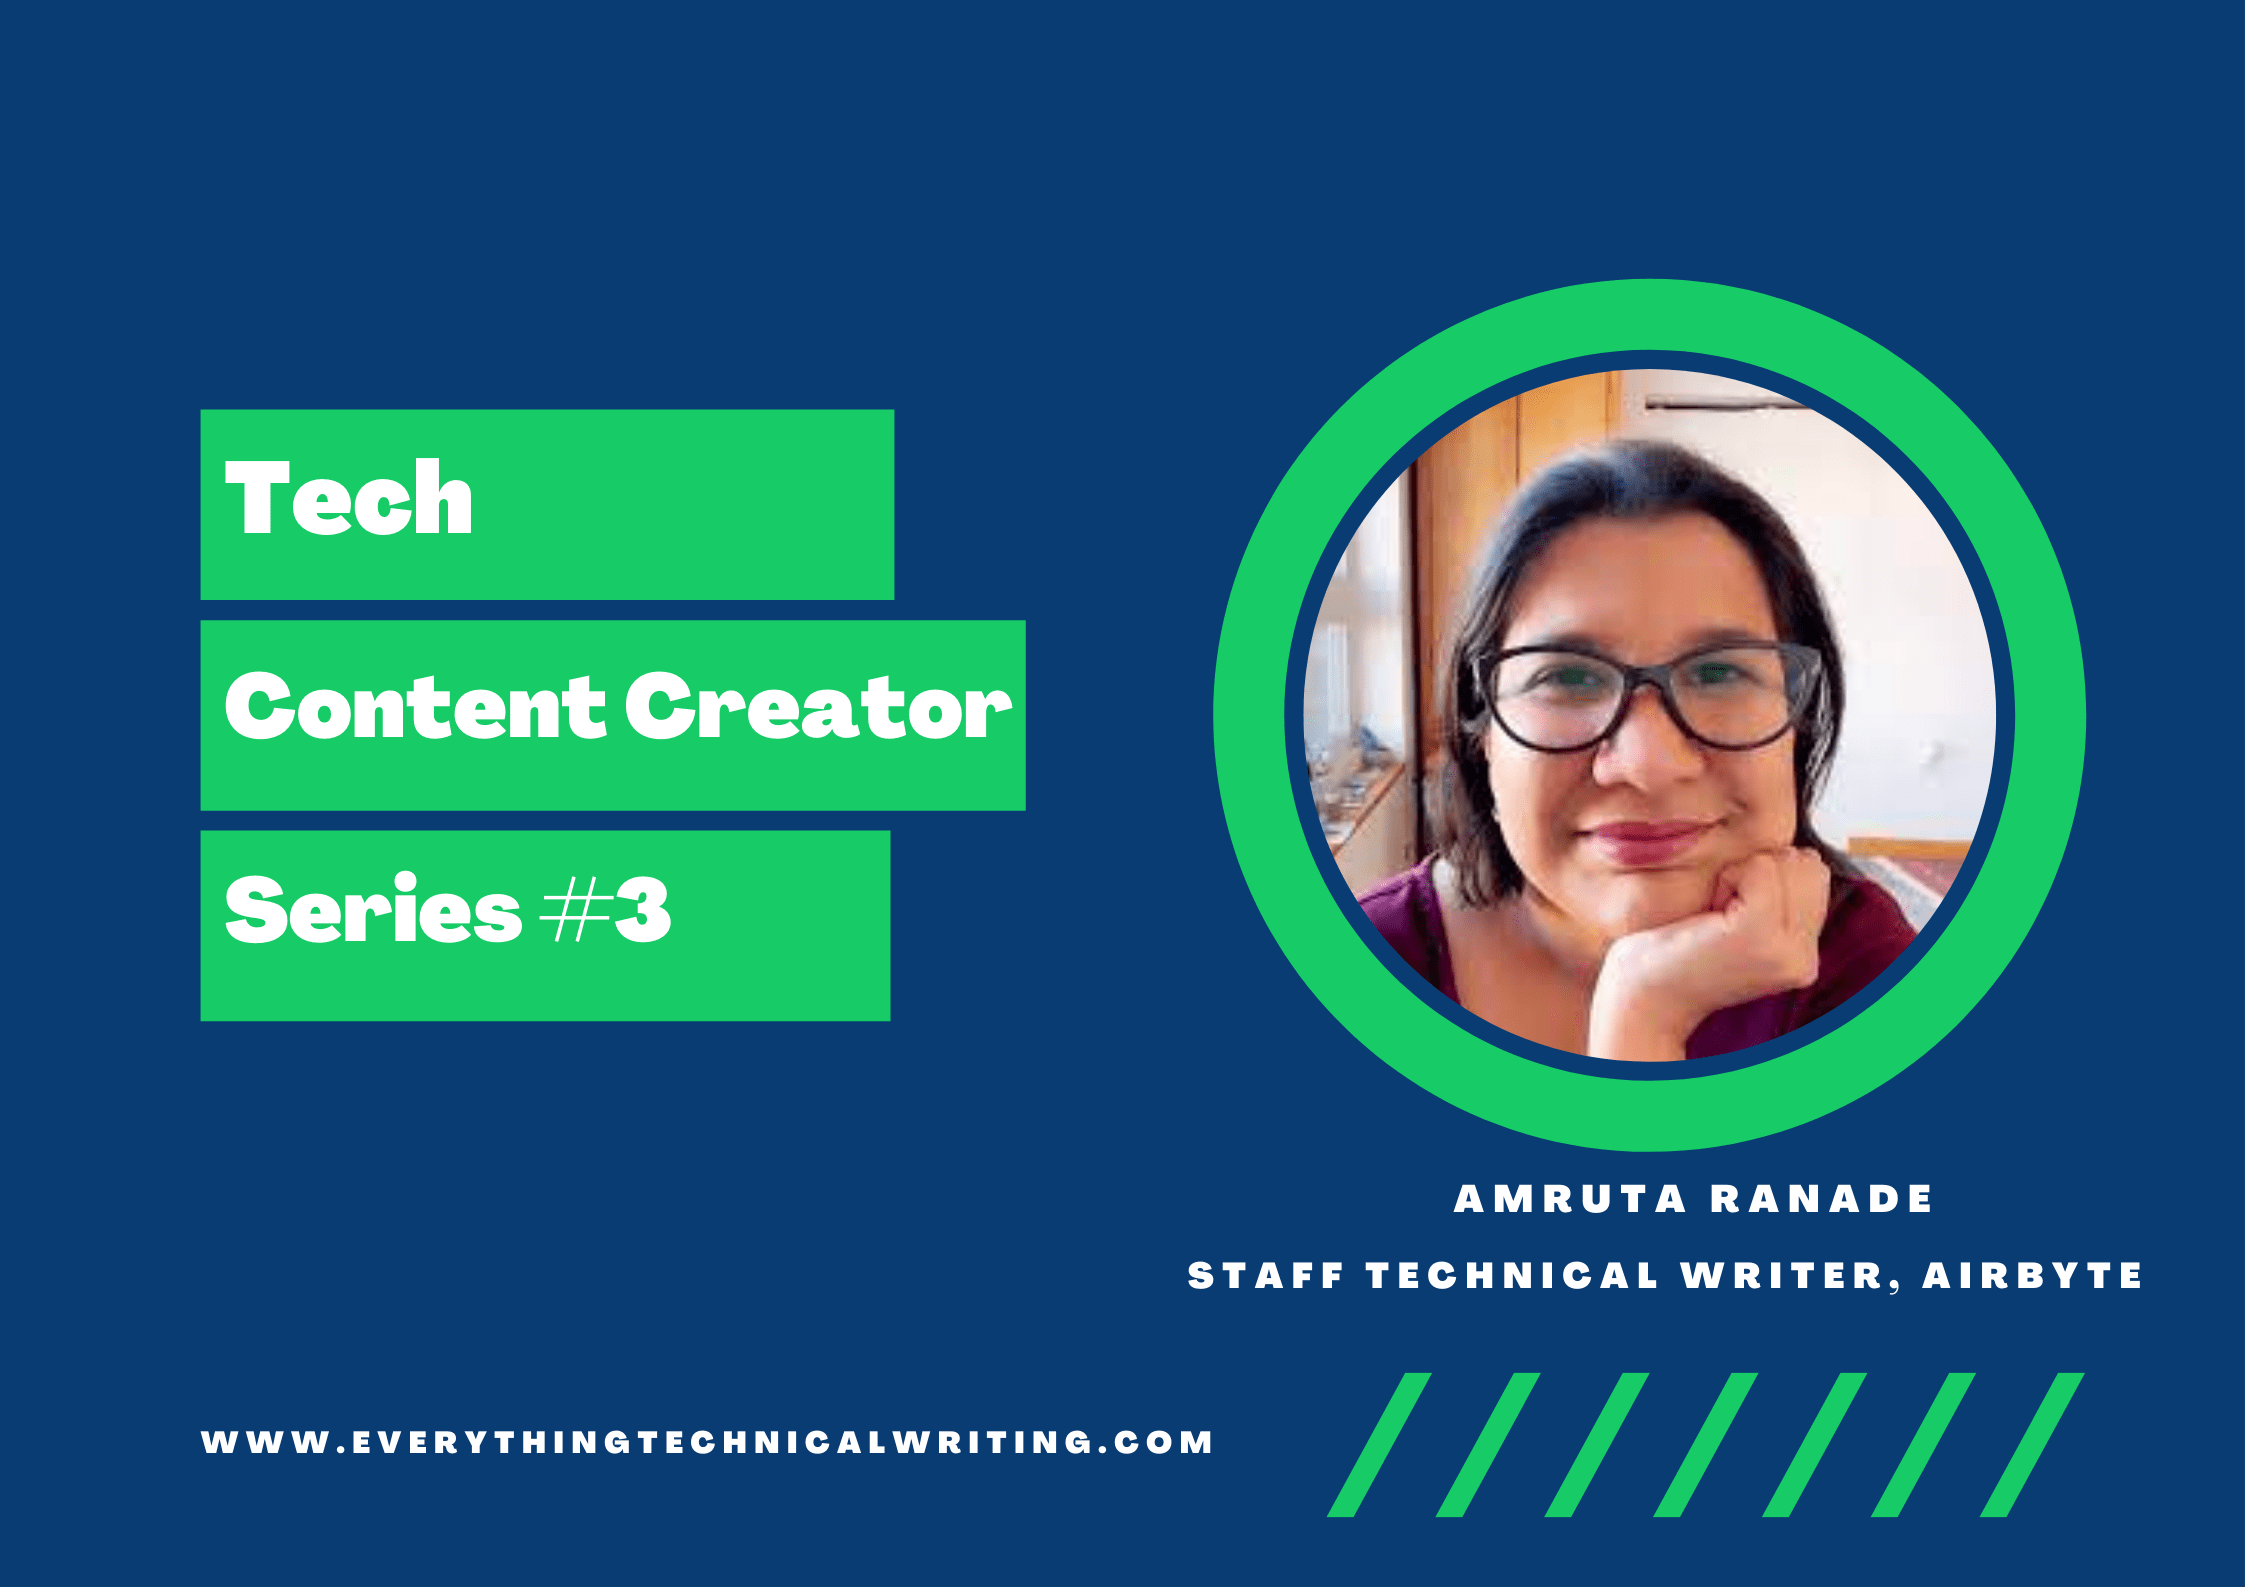 TCCS #3 From Staff Technical Writer to Developer Advocate; Read Amruta Ranade’s story